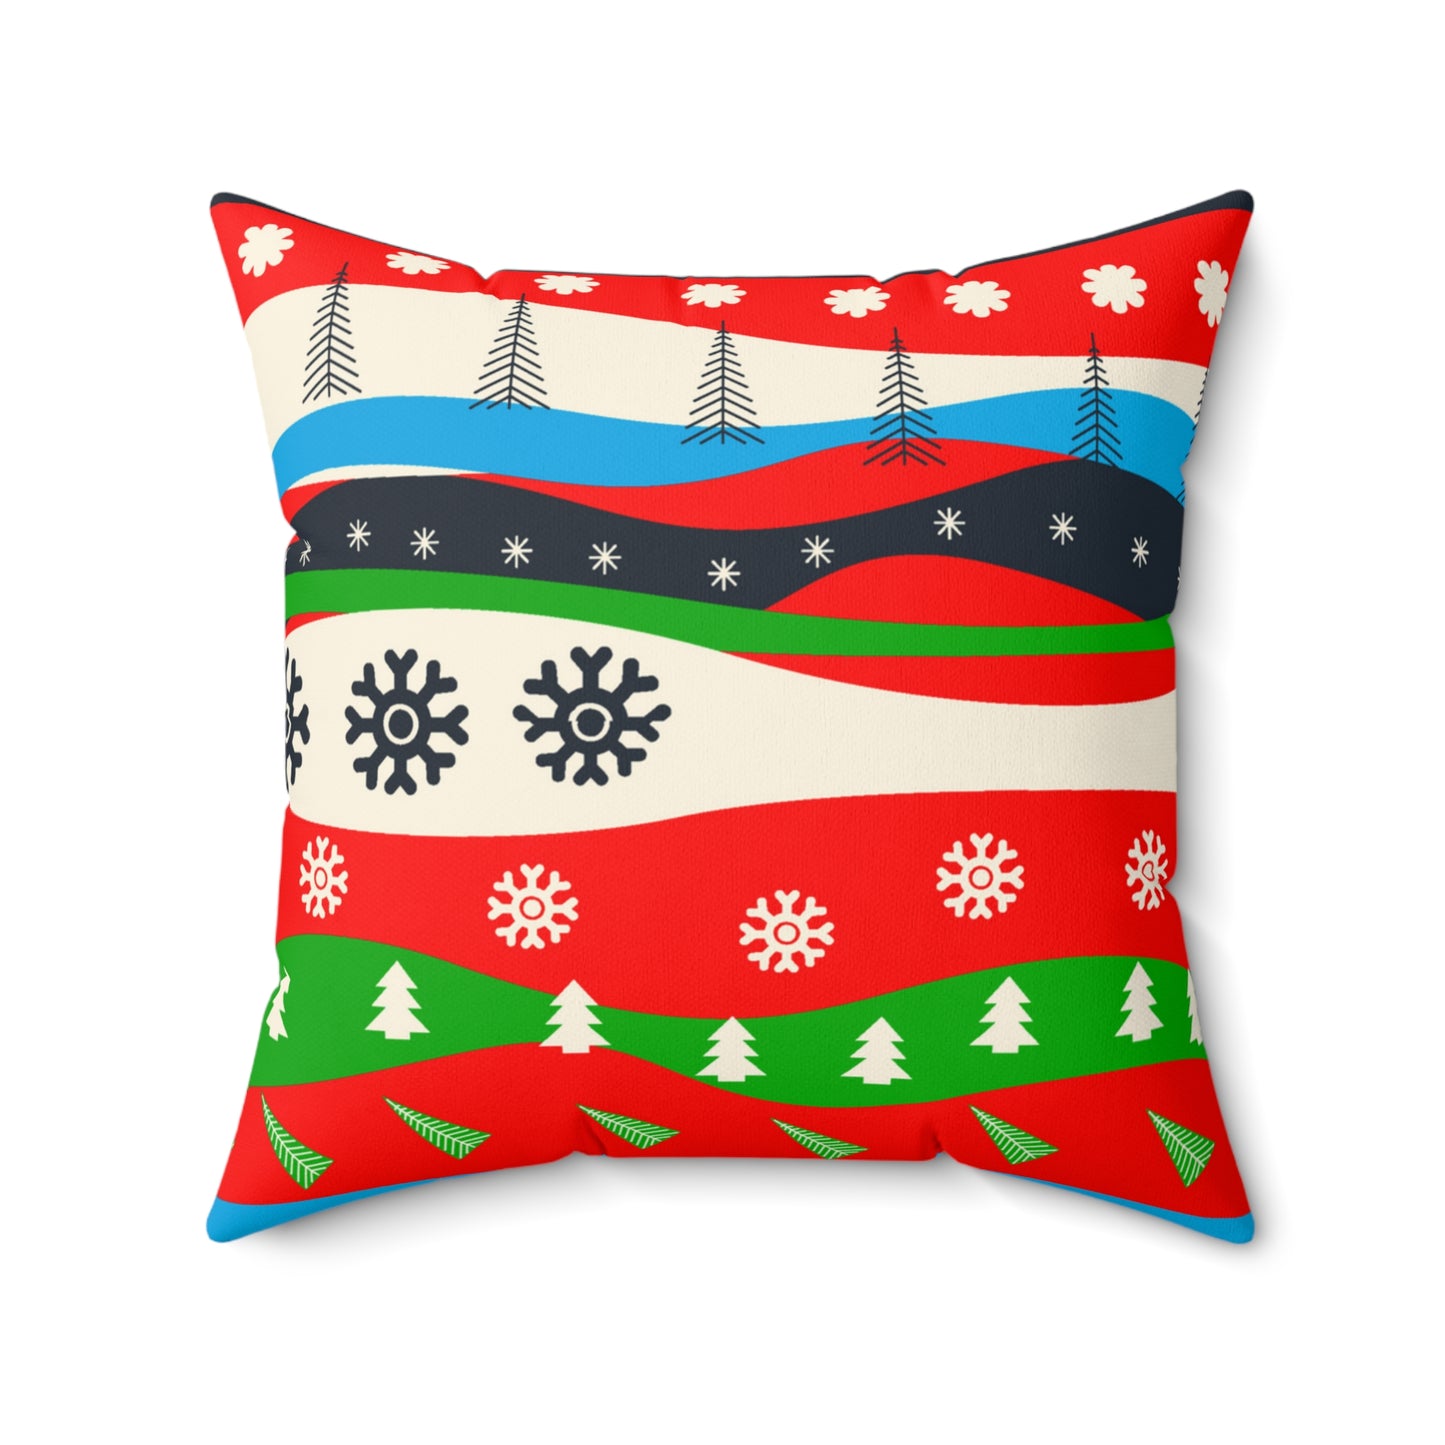 The Perfect Christmas Square Pillow